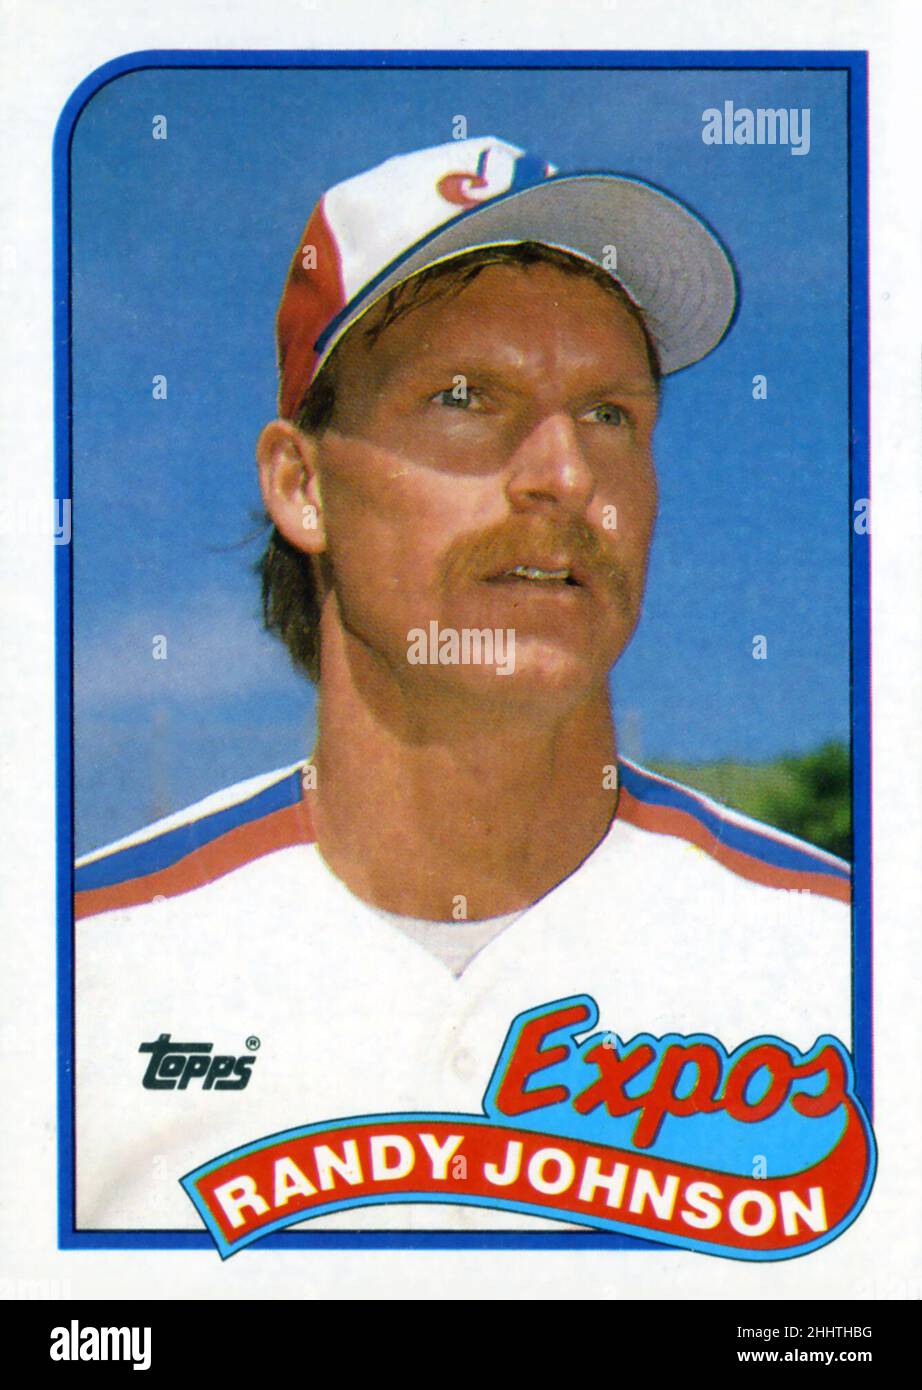 A 1989 Topps baseball card featuring Randy Johnson of the Montreal Expos. Stock Photo